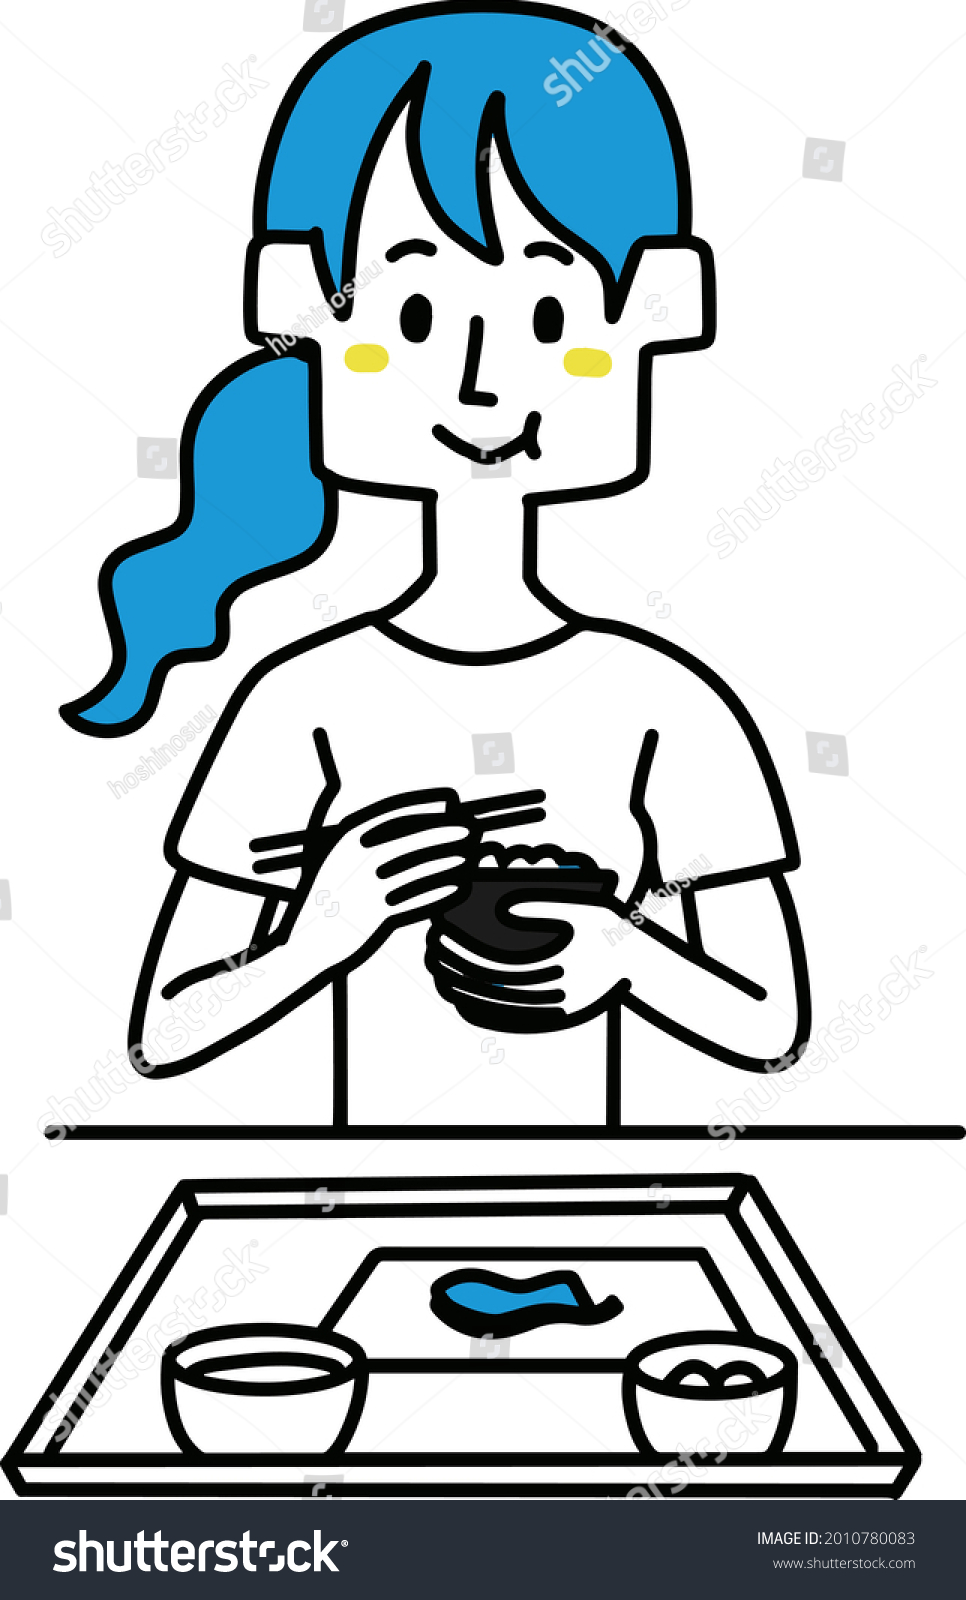 SVG of A woman who often chews and eats a well-balanced diet svg